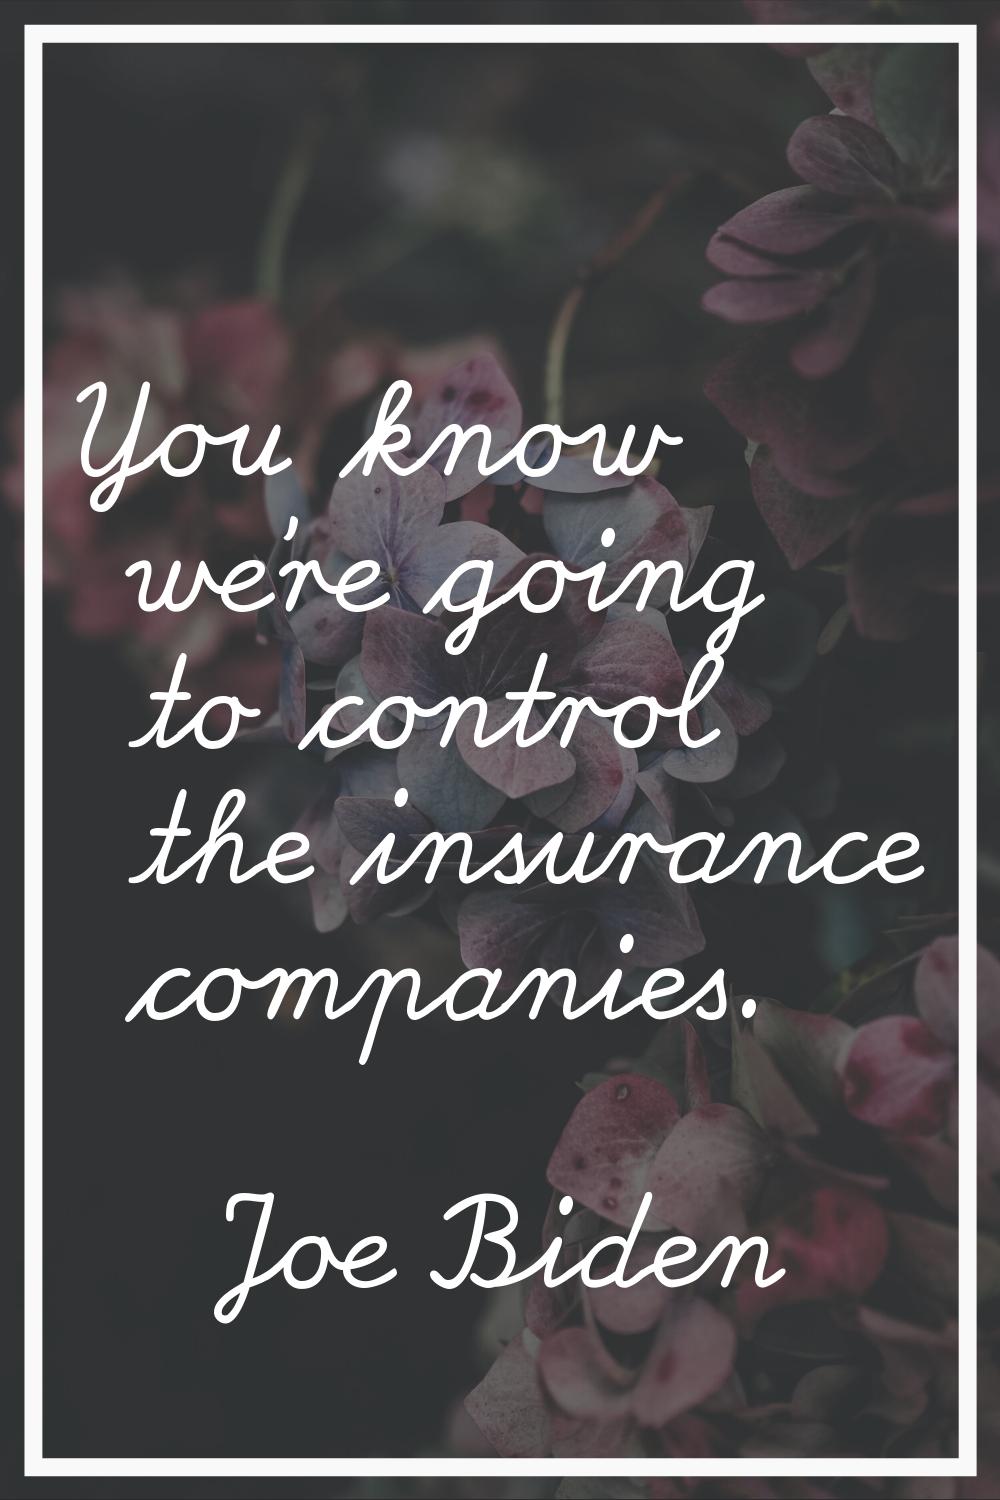 You know we're going to control the insurance companies.